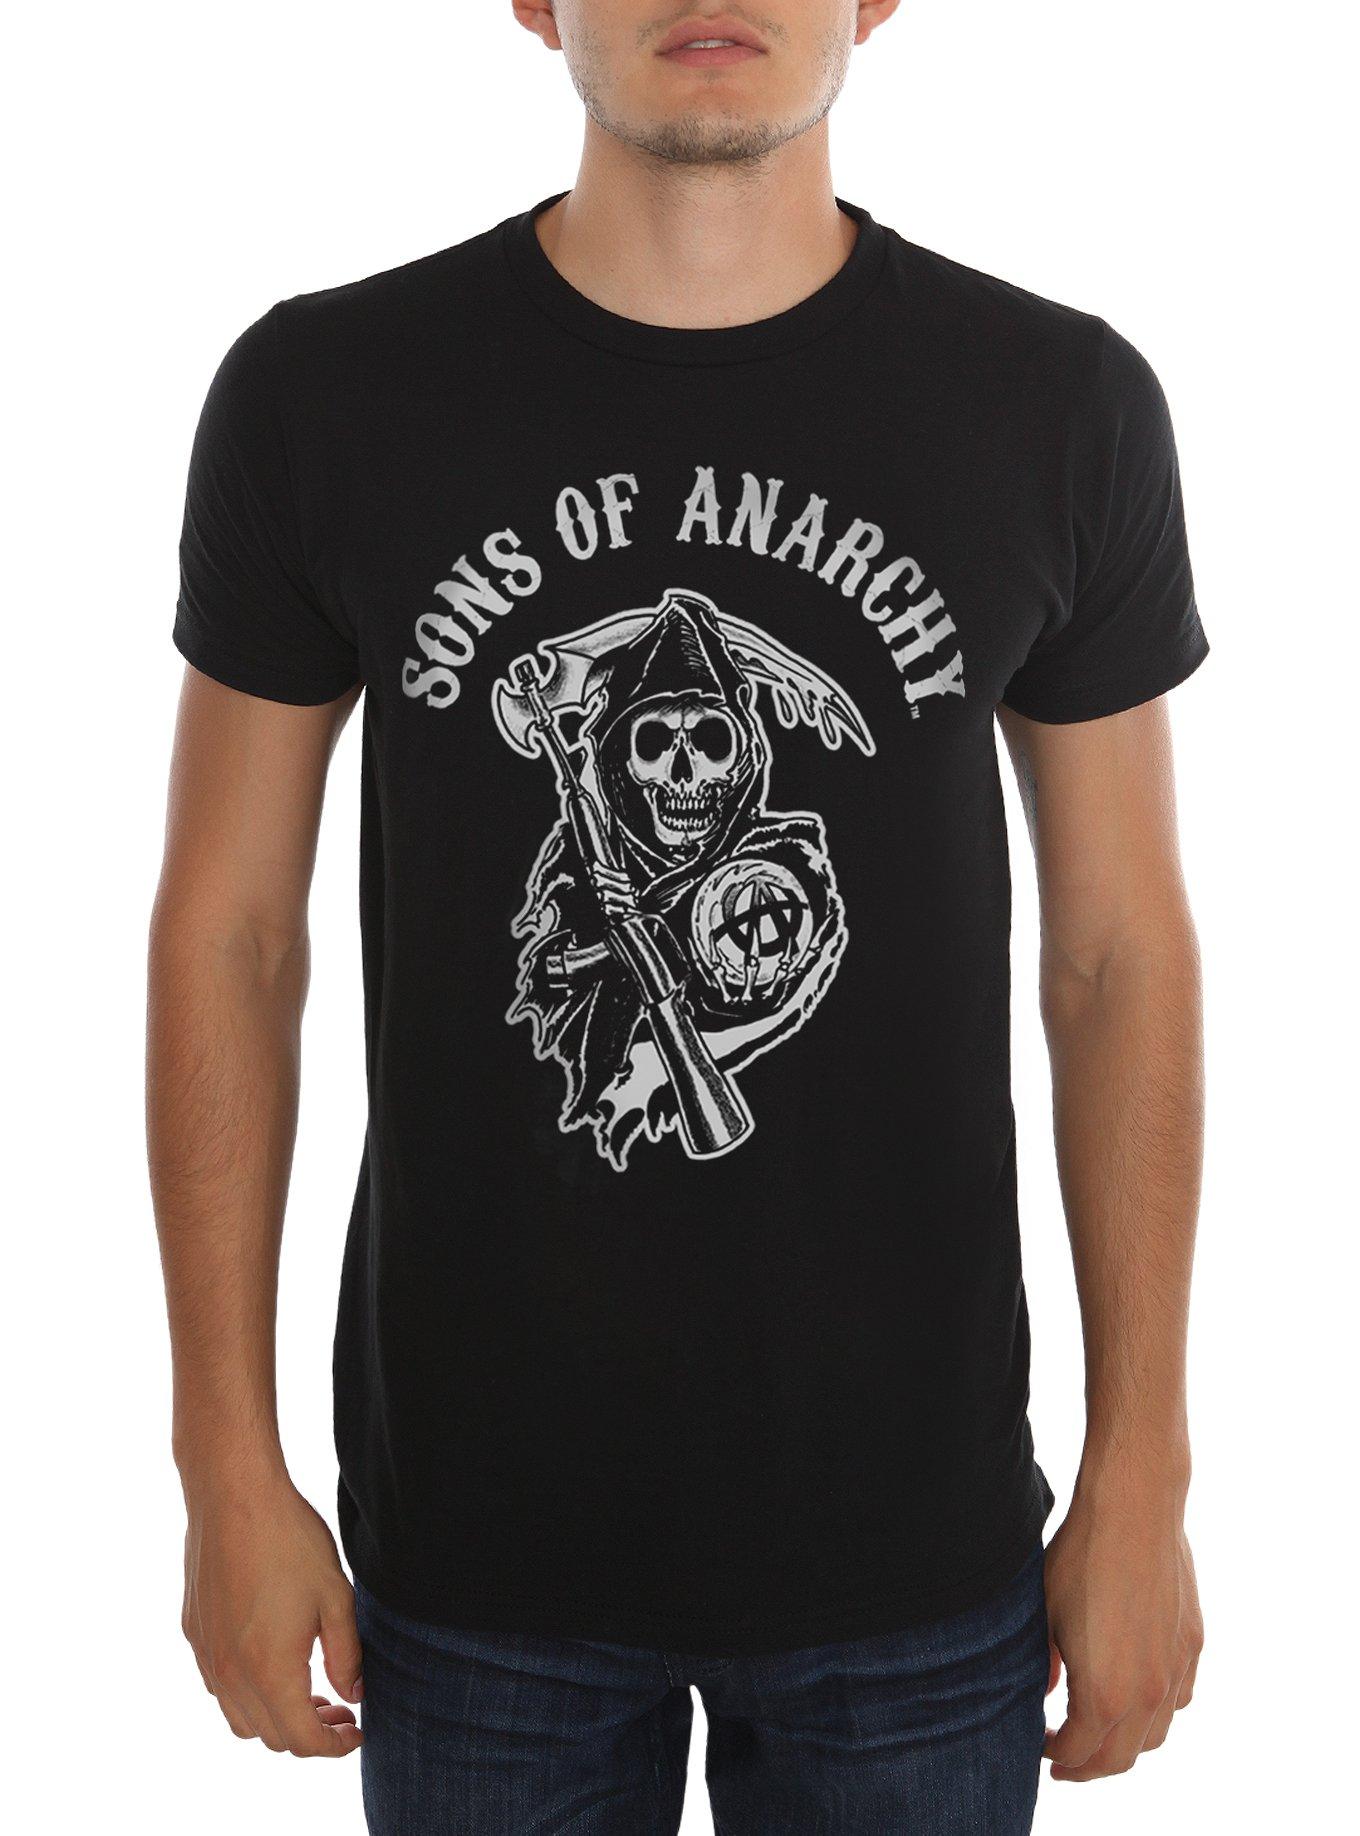 Sons Of Anarchy Logo | T-Shirt Hot Topic